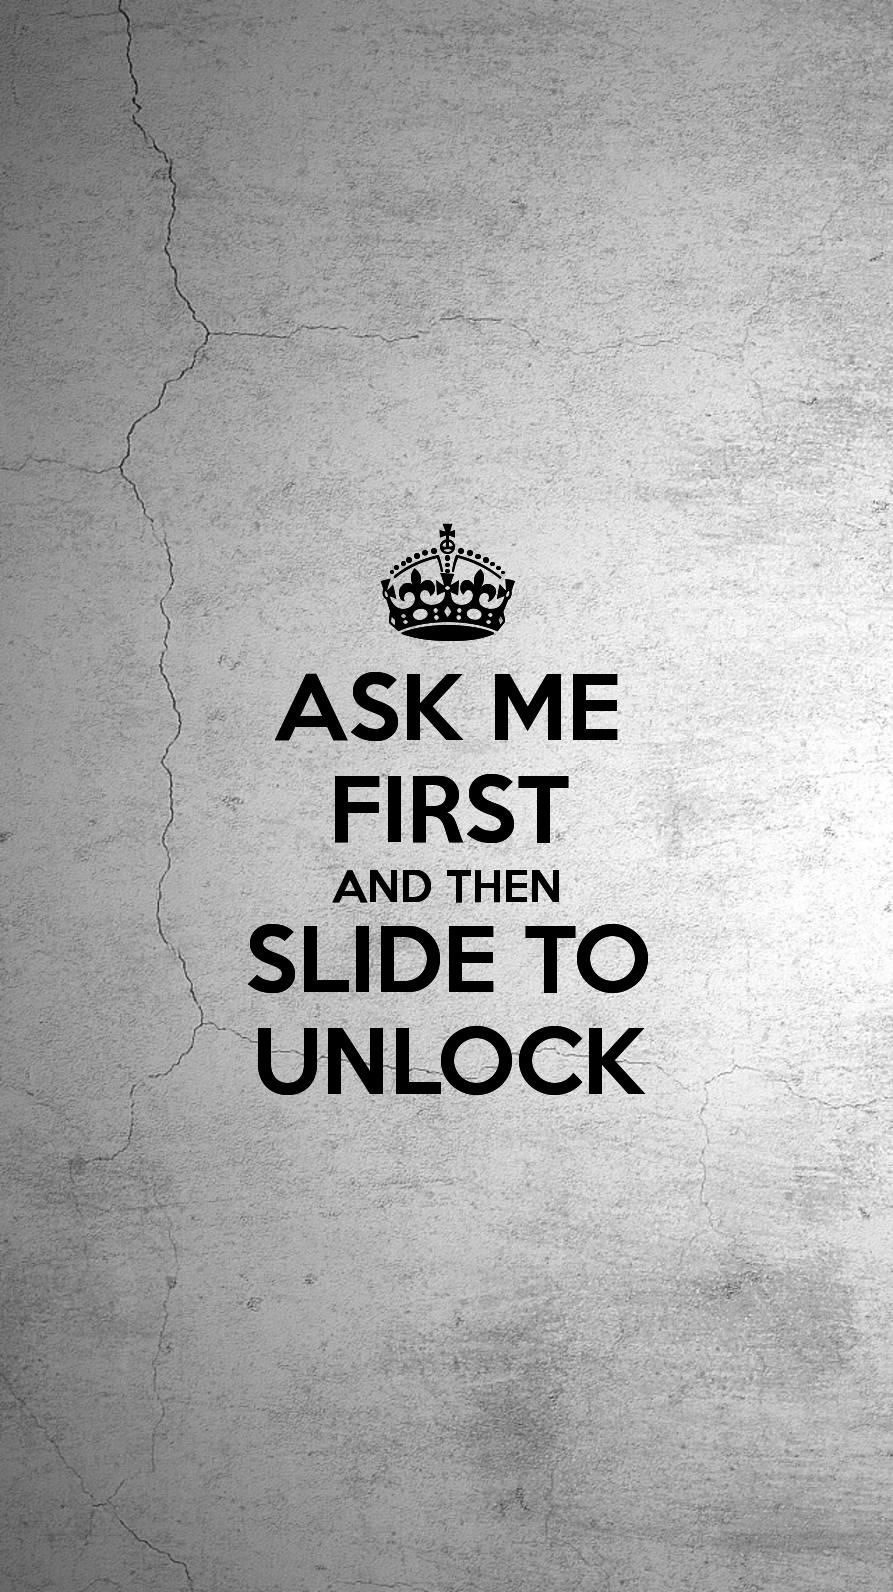 Ask me first then sli to unlock funny phone wallpaper funny iphone wallpaper funny lock screen wallpaper